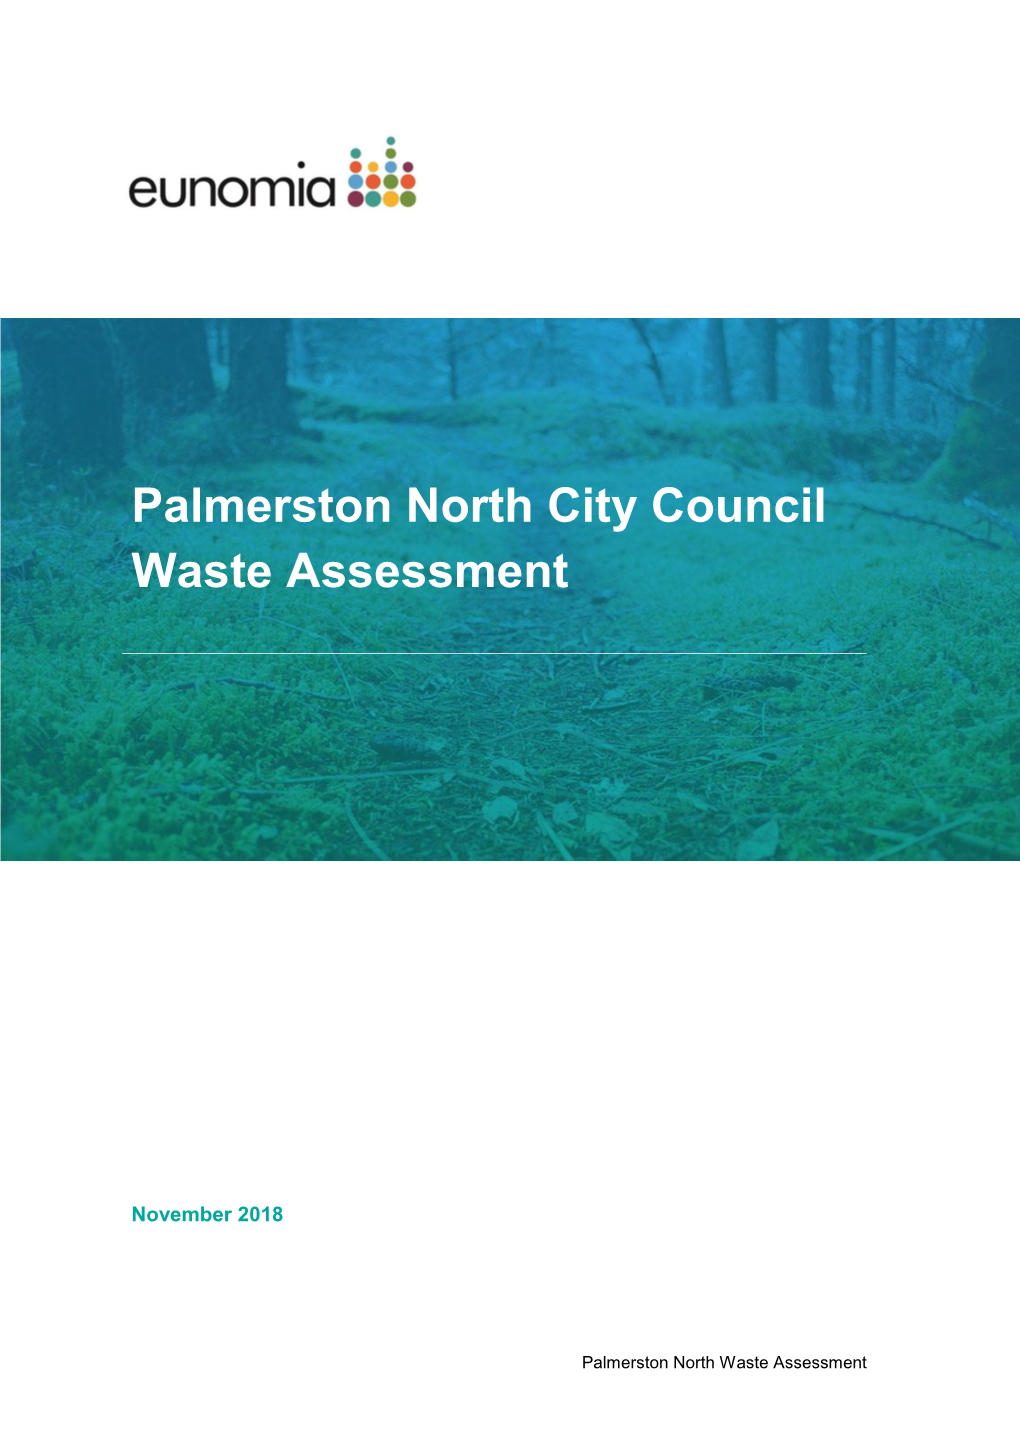 Palmerston North City Council Waste Assessment